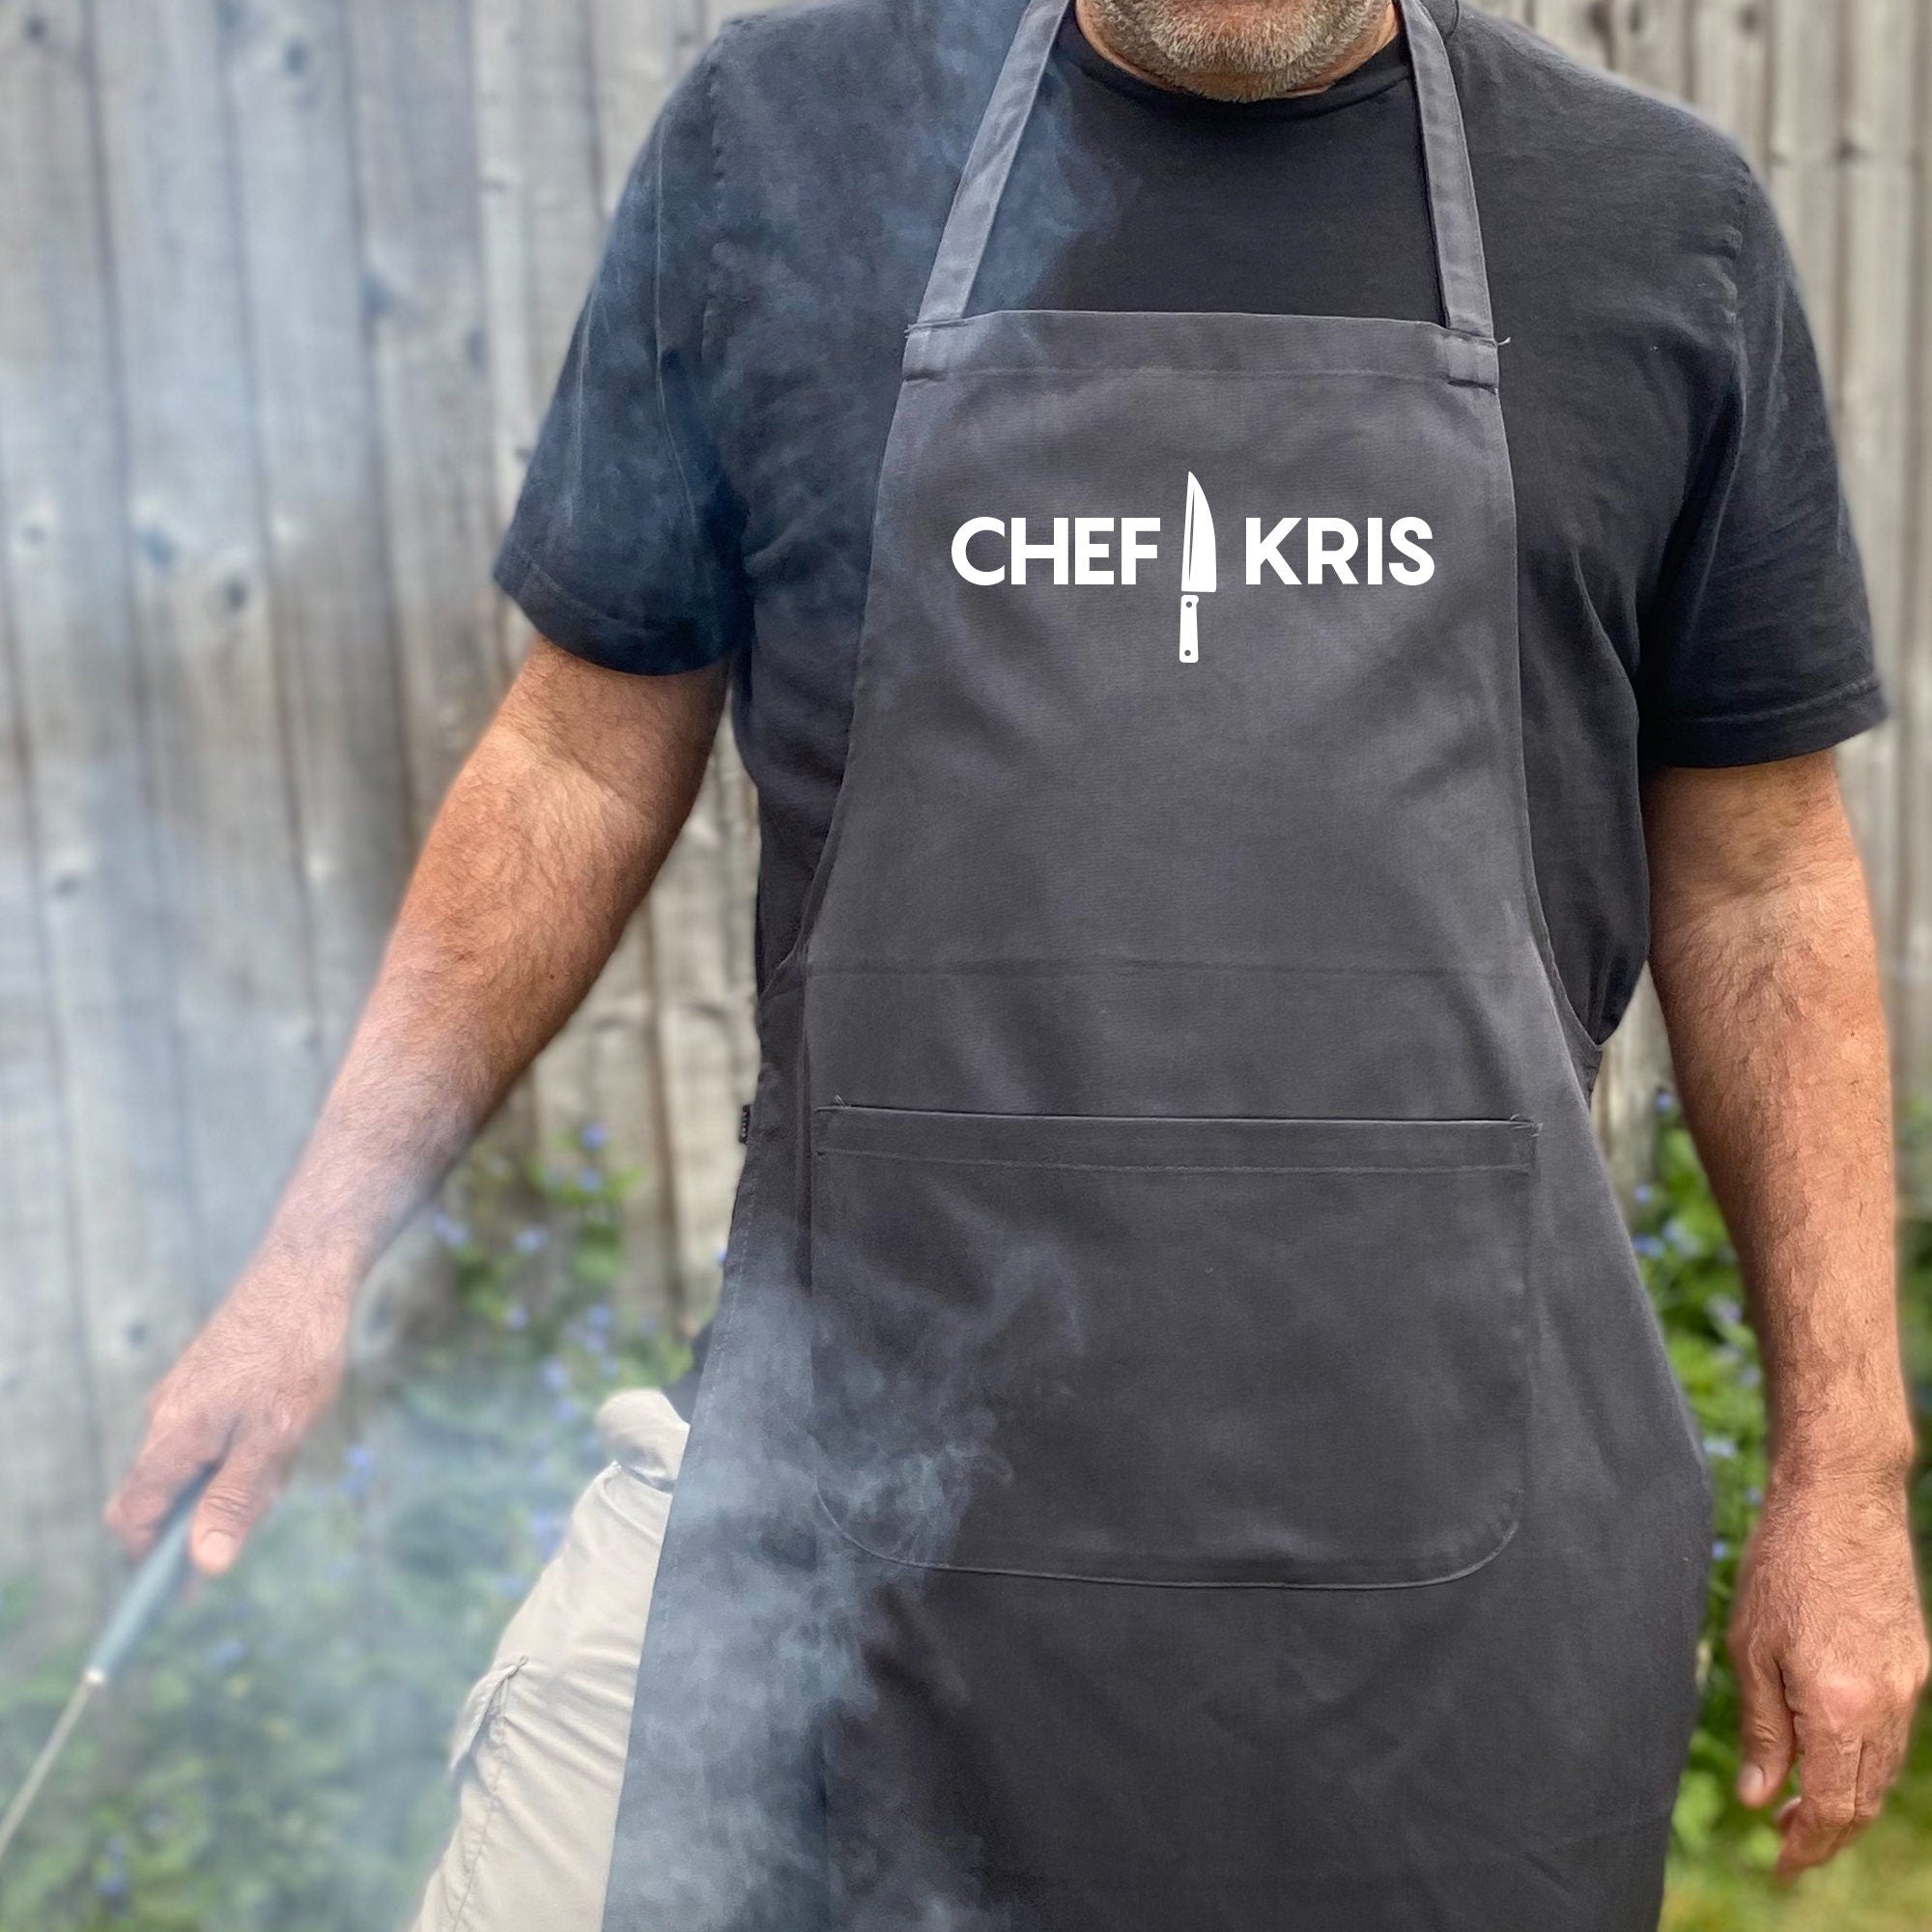 Personalised Cooking Apron For Men, Kitchen Cooking Gift For Him, Chef Husband Father'S Day Bbq Gift